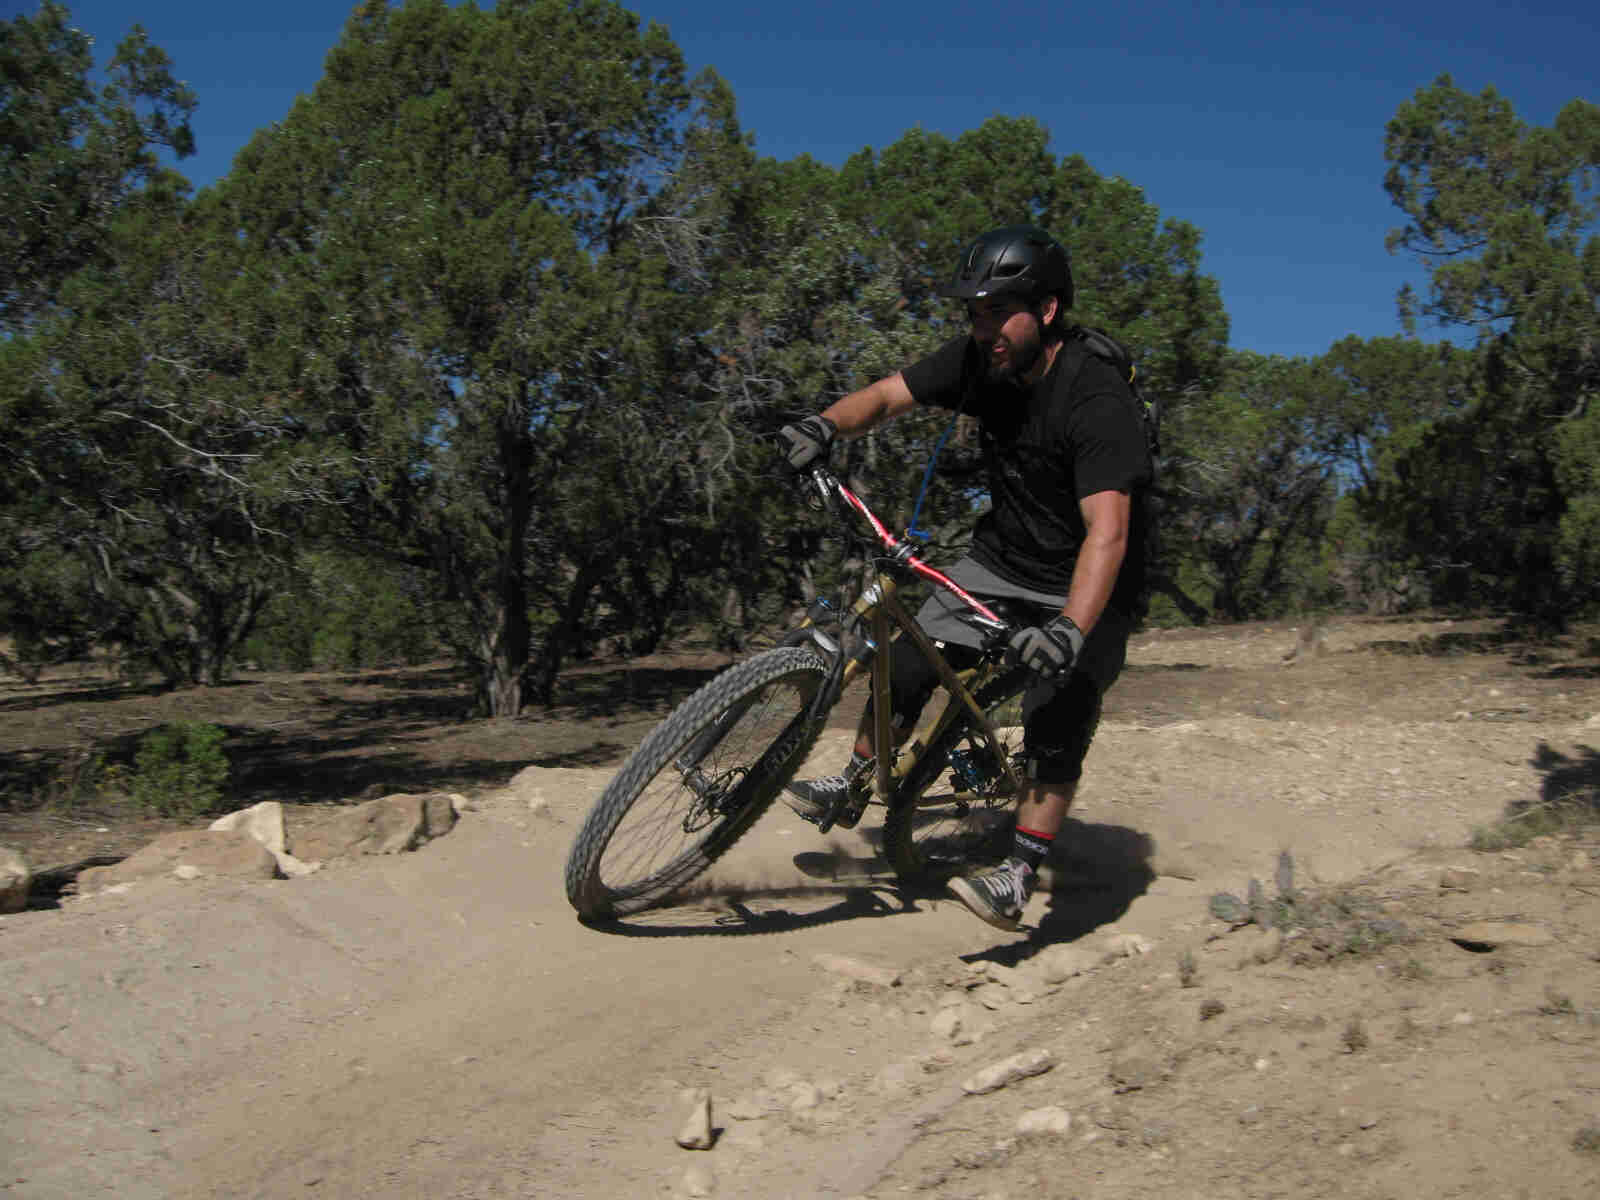 Front view of a cyclist riding a Surly Instigator bike, rounding a berm on a rocky trail, with small trees behind them